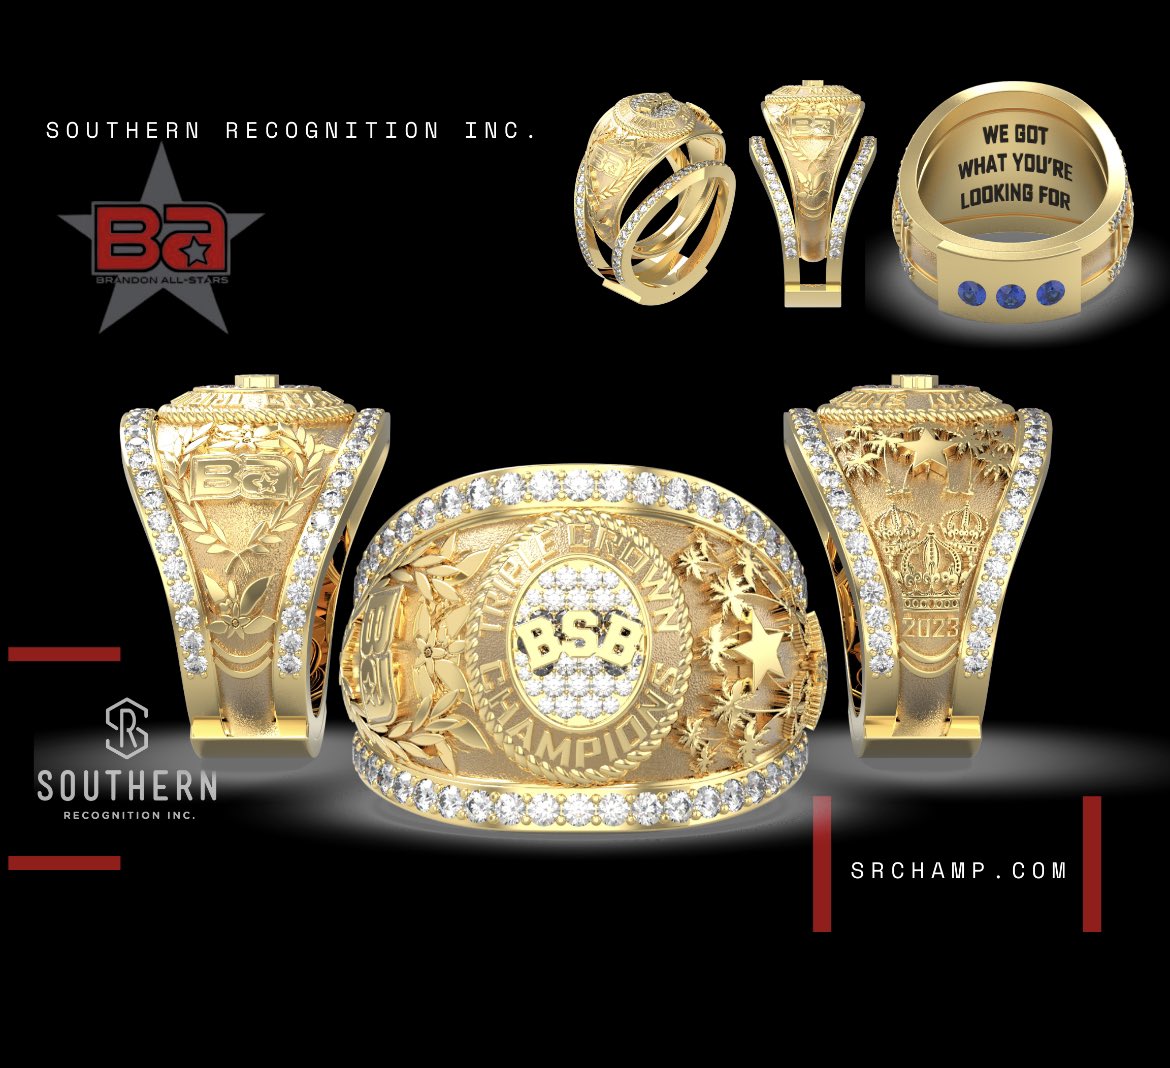 BACK to BACK to BACK Triple Crown Champions! We are so proud of BSB for achieving this huge accomplishment! Thank you @SRChampRings for helping design this very special one of a kind ring! This piece will be cherished for years to come! 🖤 👑👑👑